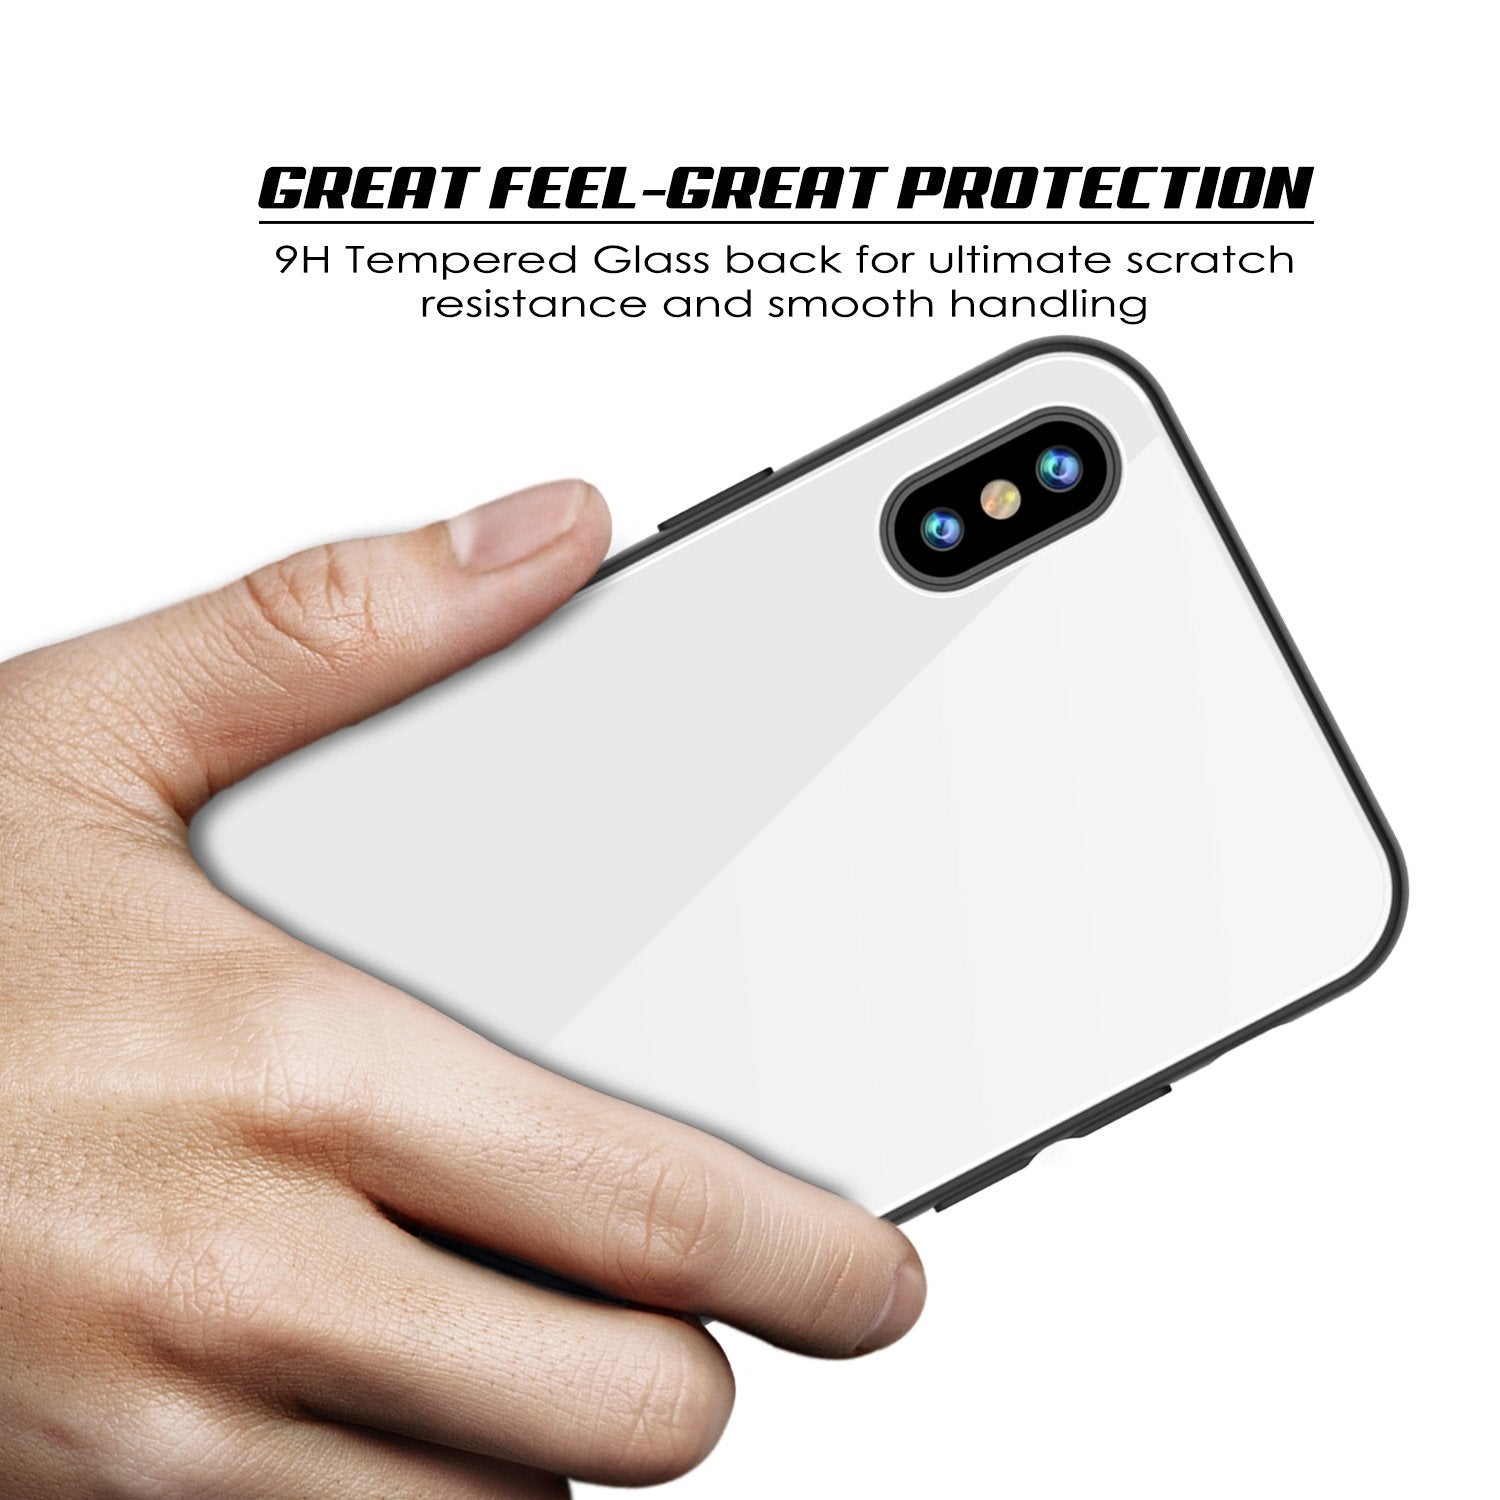 iPhone 8 Case, Punkcase GlassShield Ultra Thin Protective 9H Full Body Tempered Glass Cover W/ Drop Protection & Non Slip Grip for Apple iPhone 7 / Apple iPhone 8 (White)